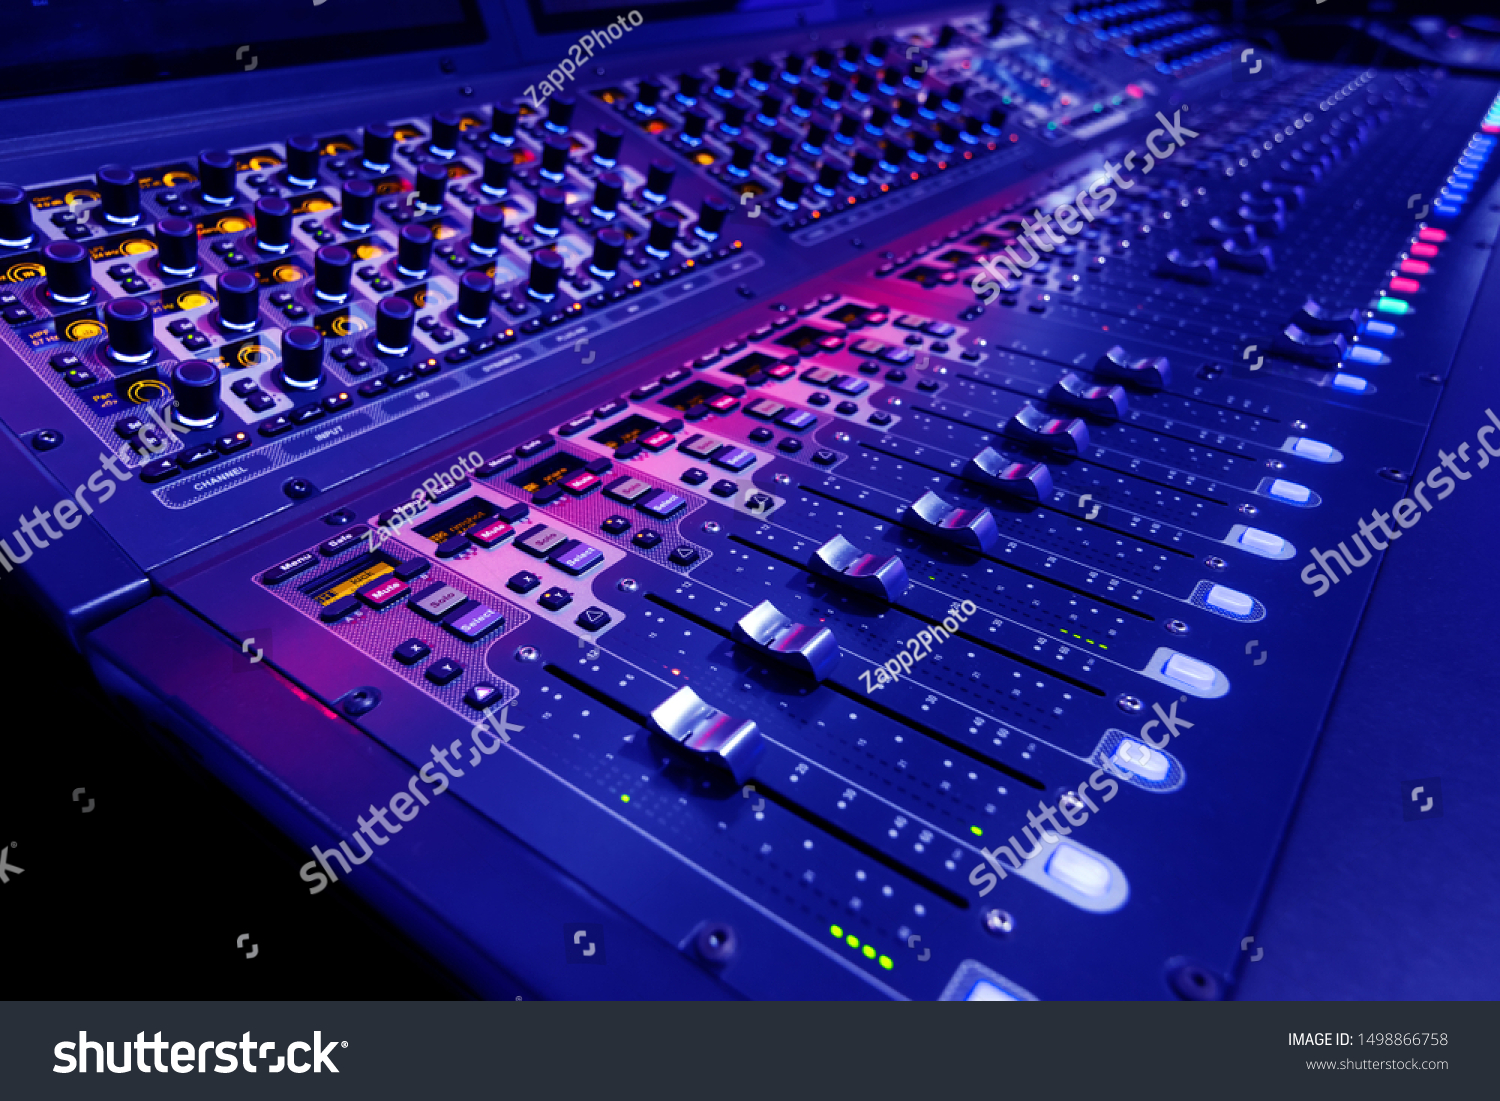 Professional audio studio sound mixer console board panel with recording , faders and adjusting knobs,TV equipment. Blue tone and close-up image. #1498866758